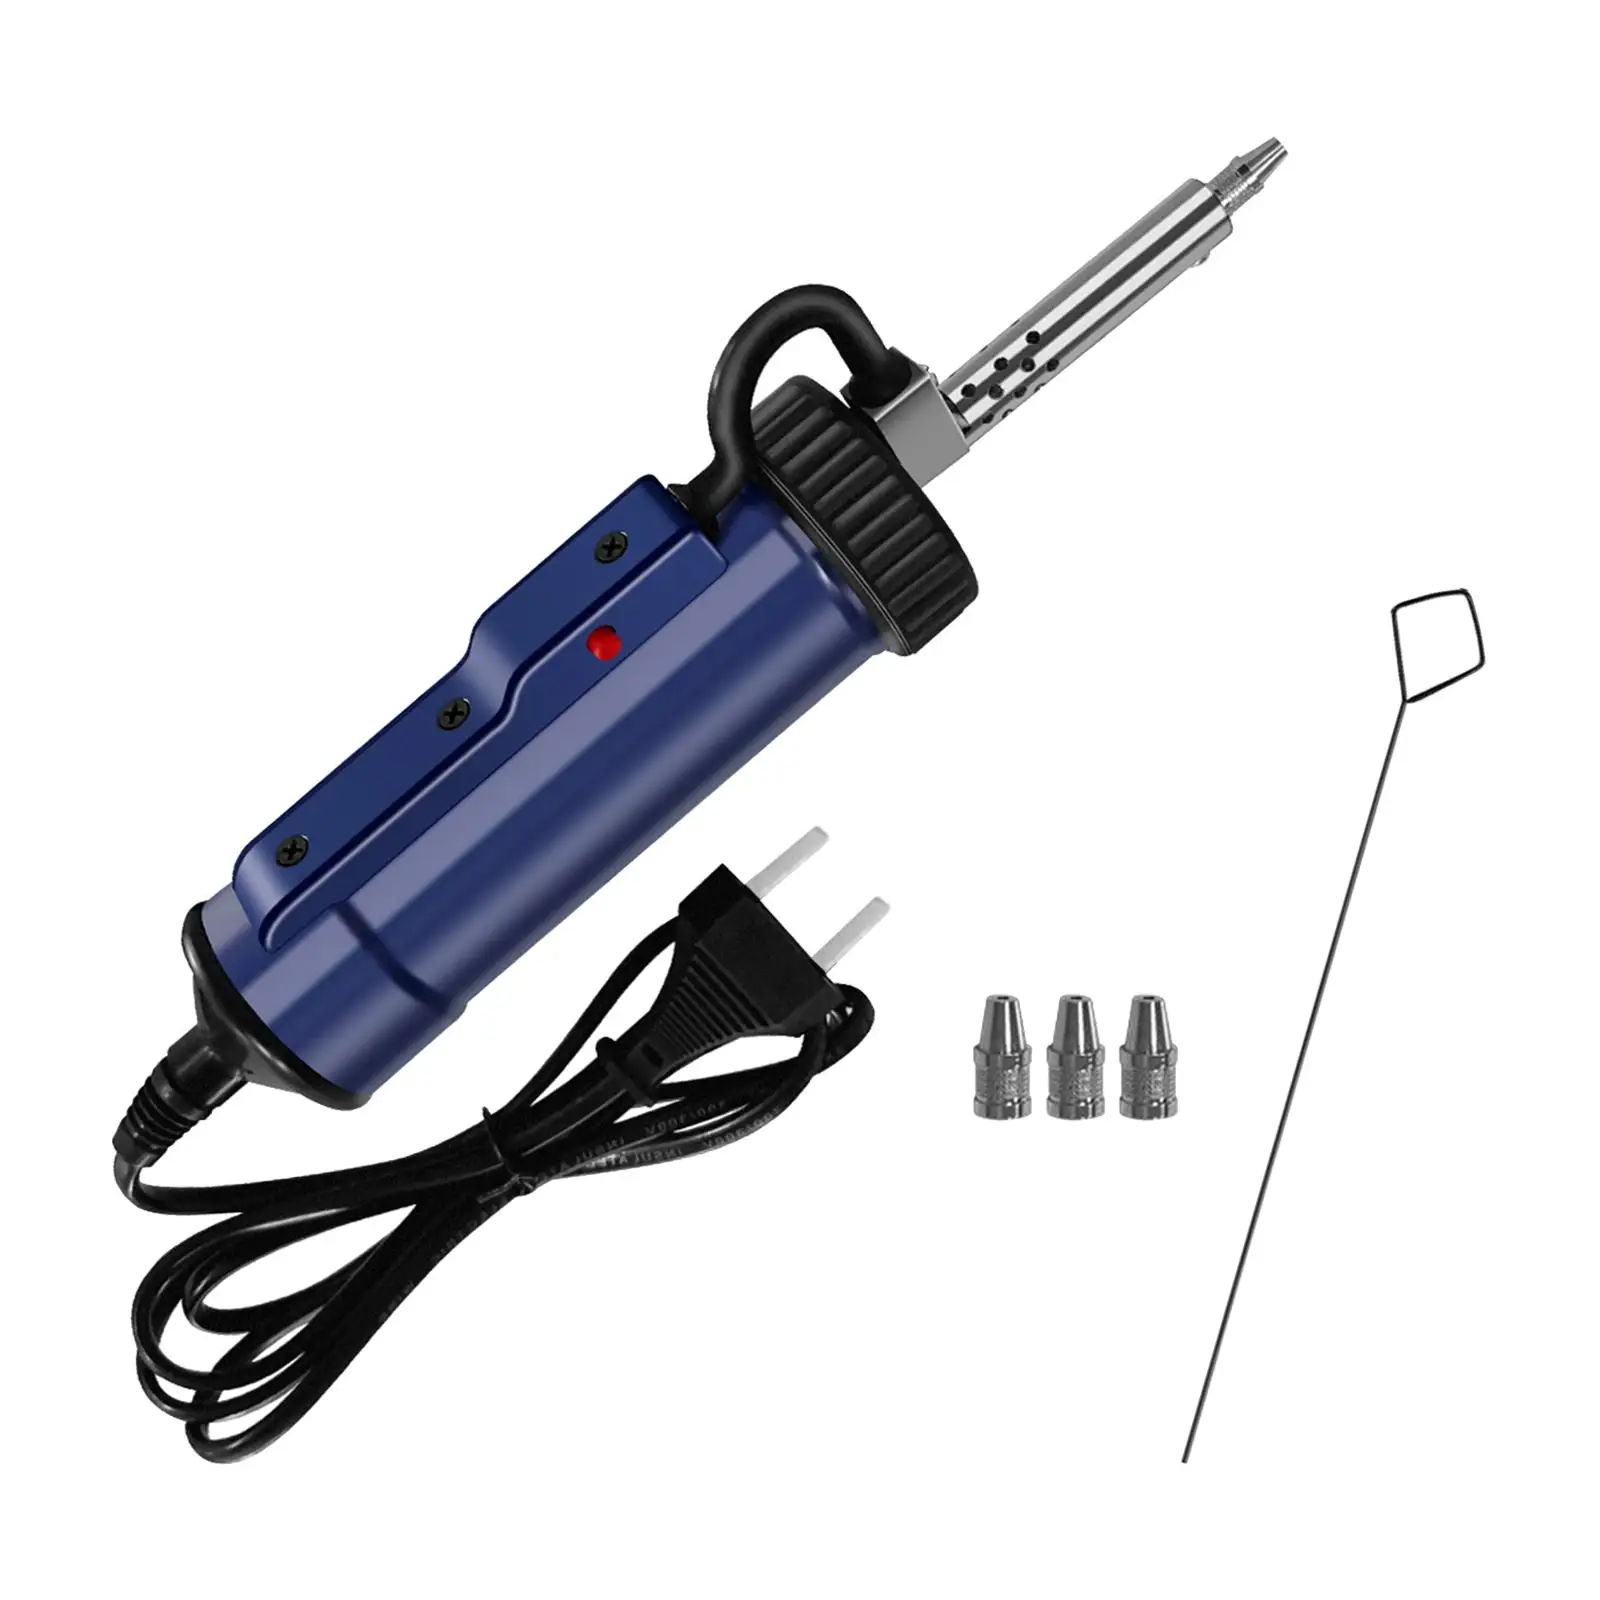 Automatic Handheld Solder Iron Kits US Adapter Solder suckers for Industry Circuit Board Jewelry Home DIY Hobby Appliance Repair